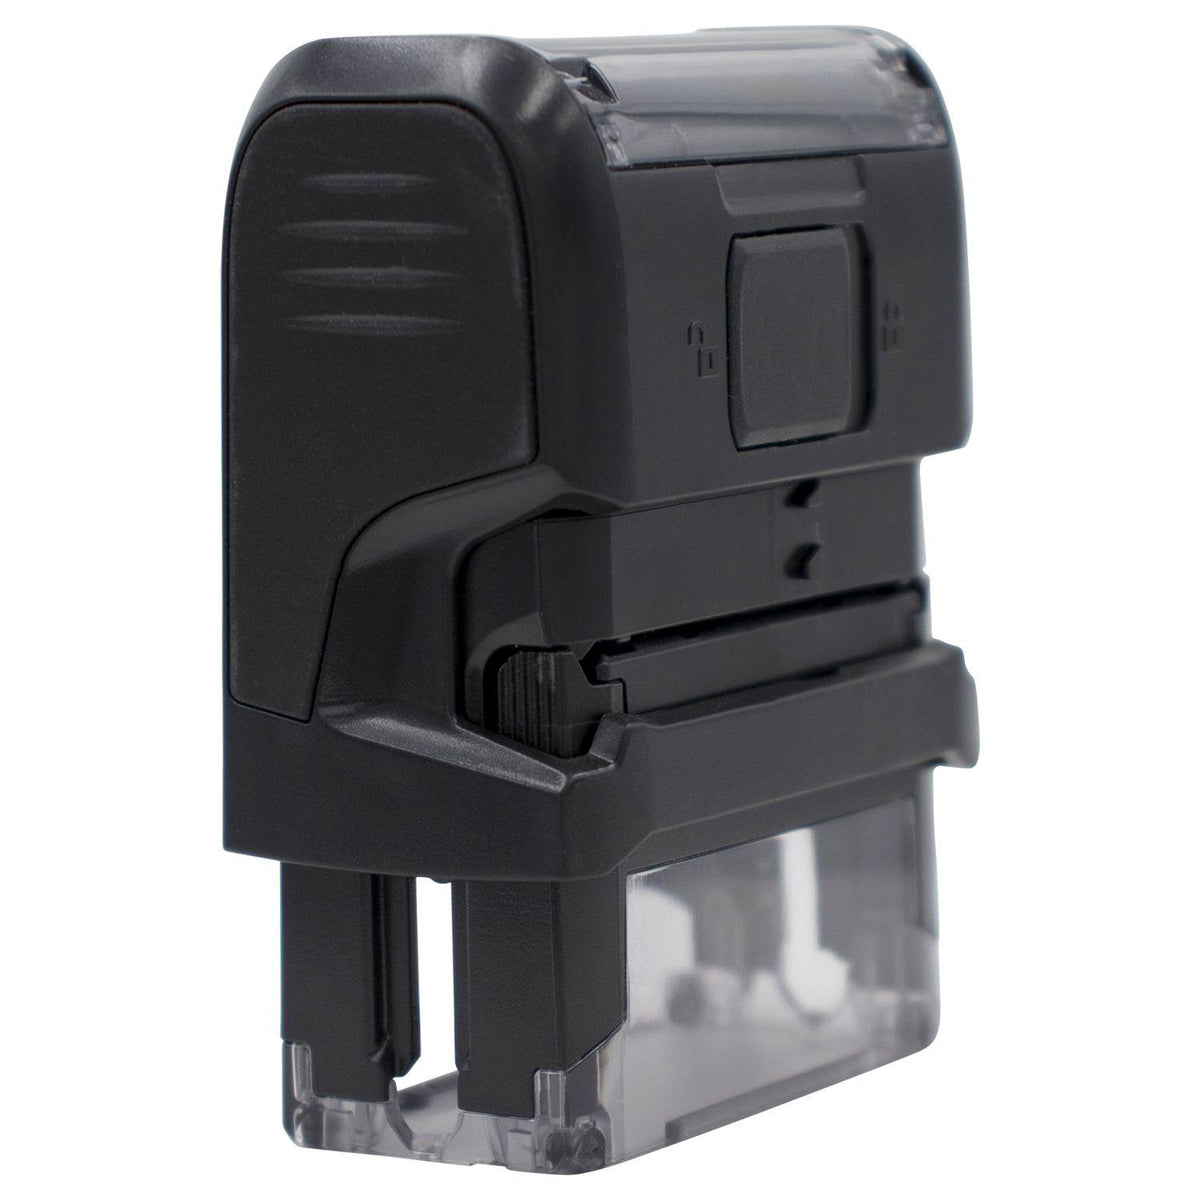 Self Inking Service Copy Stamp - Engineer Seal Stamps - Brand_Trodat, Impression Size_Small, Stamp Type_Self-Inking Stamp, Type of Use_Office